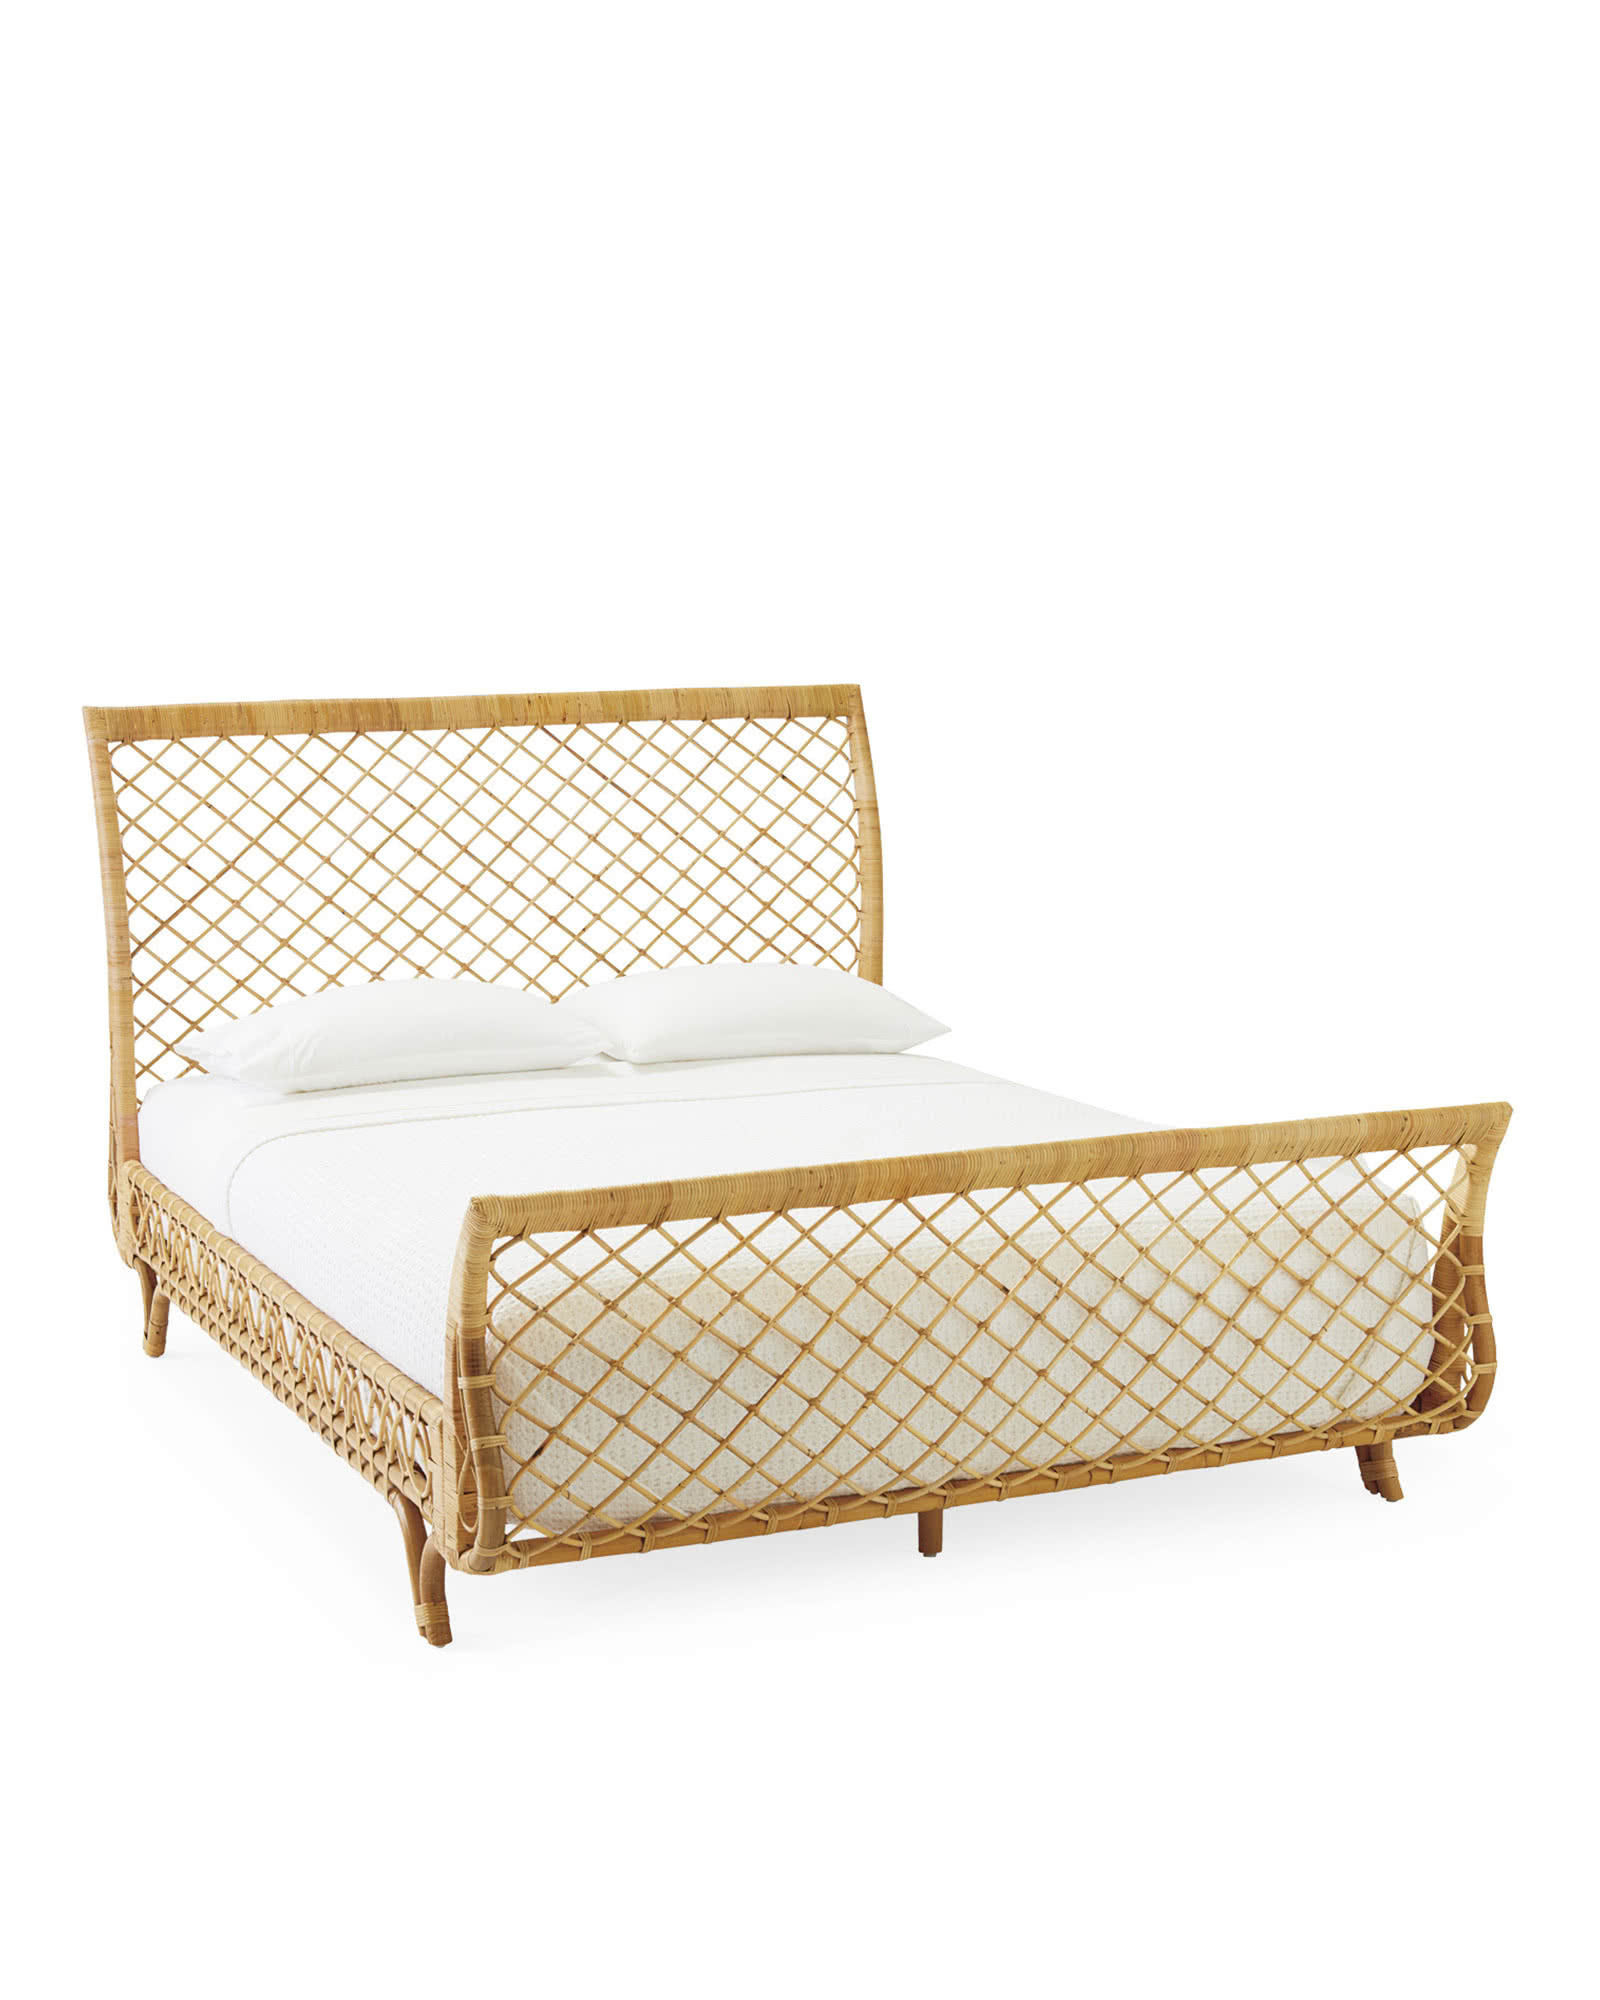 Avalon Bed Serena Lily